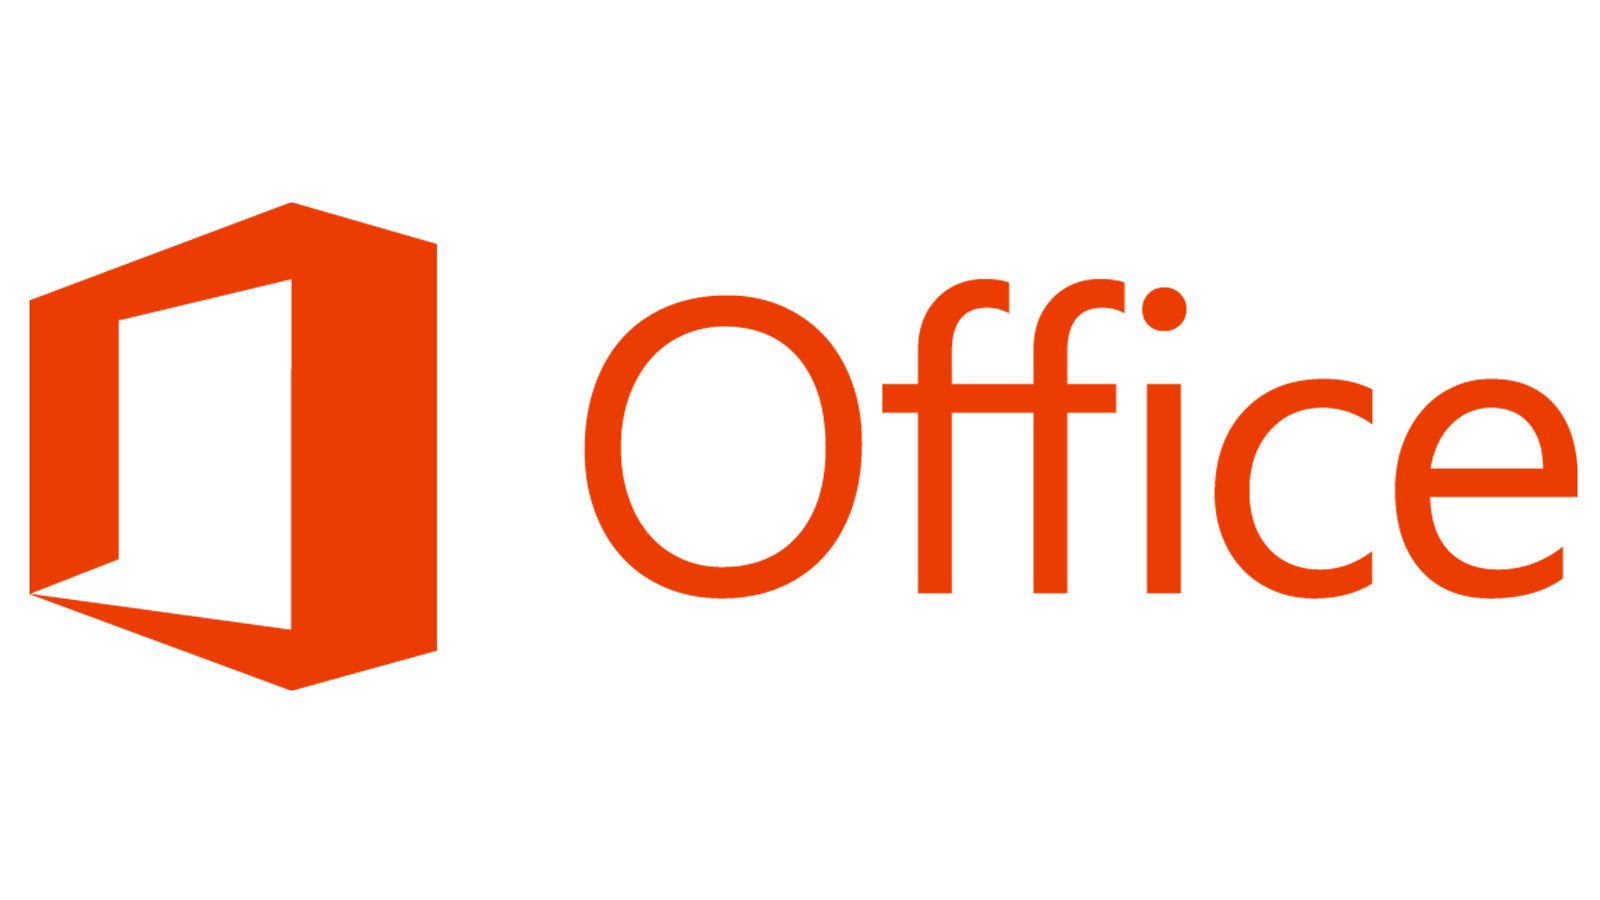 Office for mac 2019 download